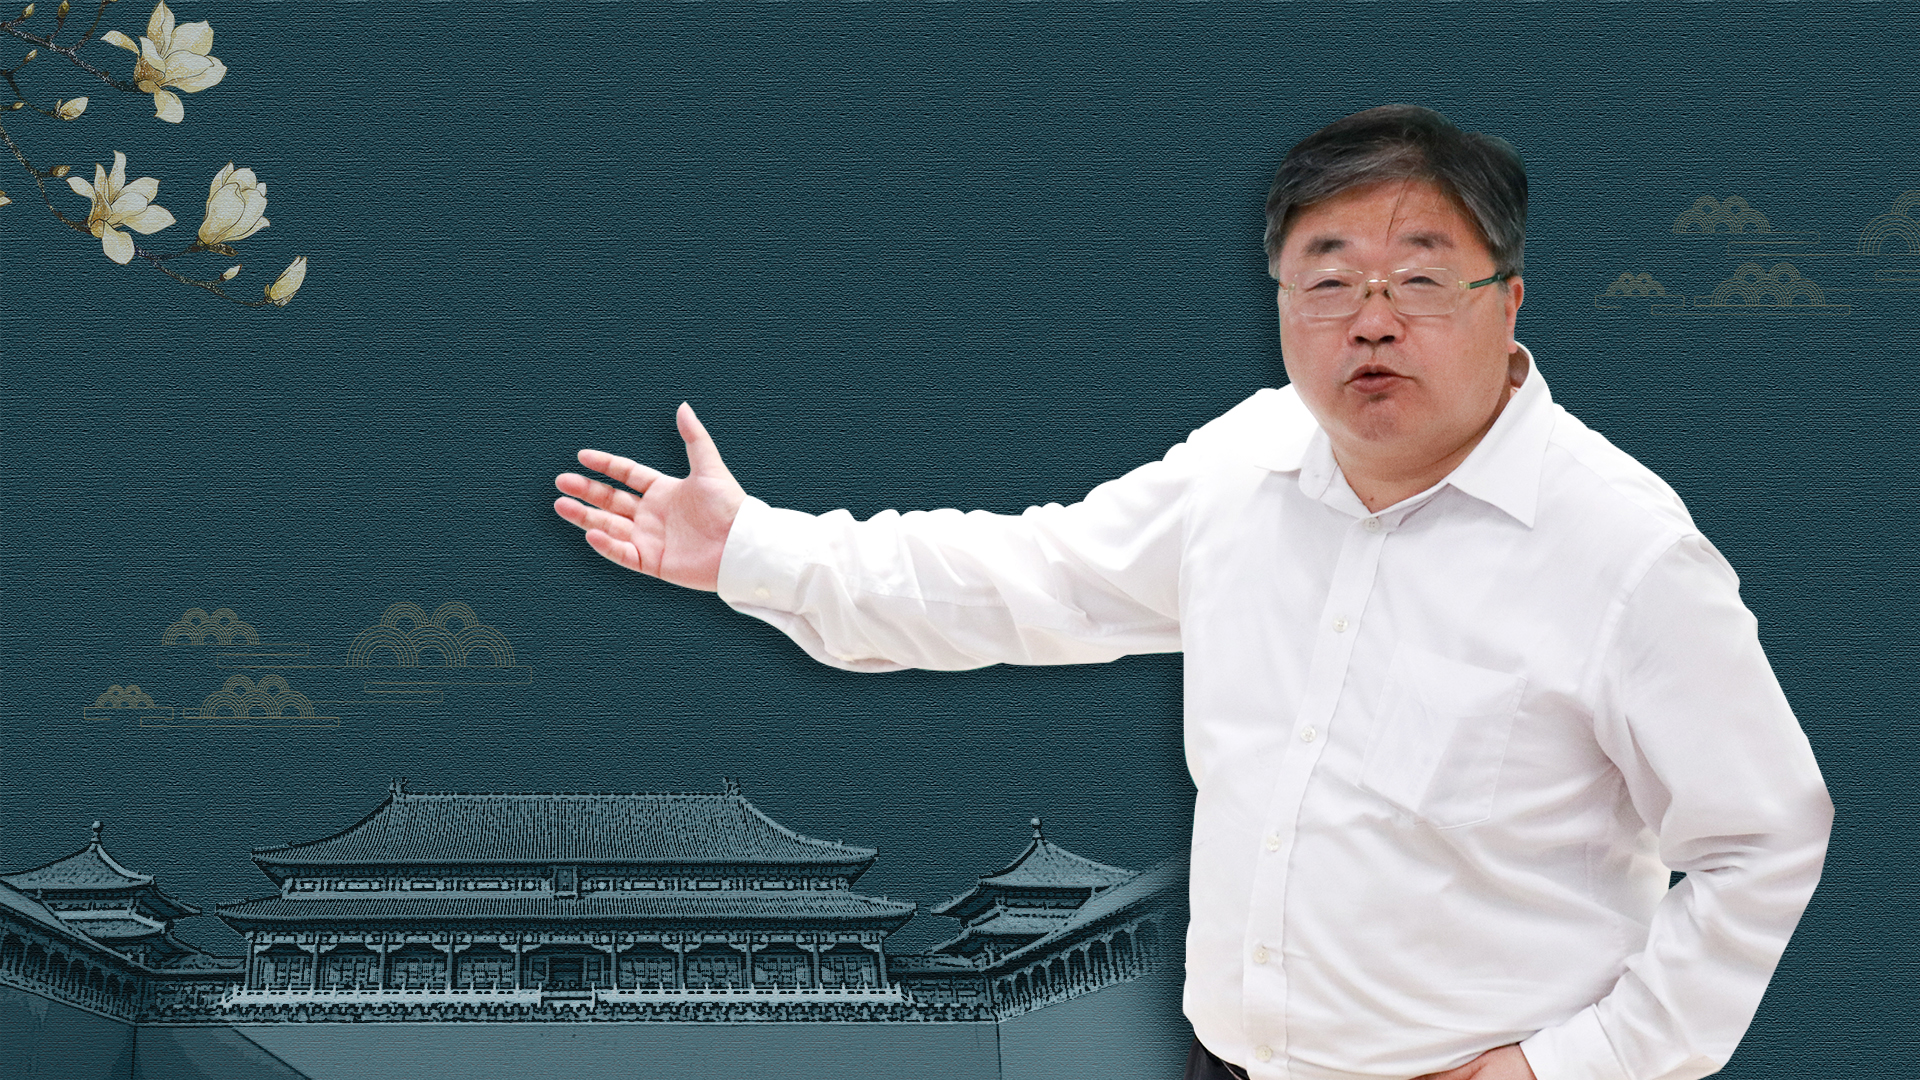 Palace Museum expert lectures on the Forbidden City and Gugongnology